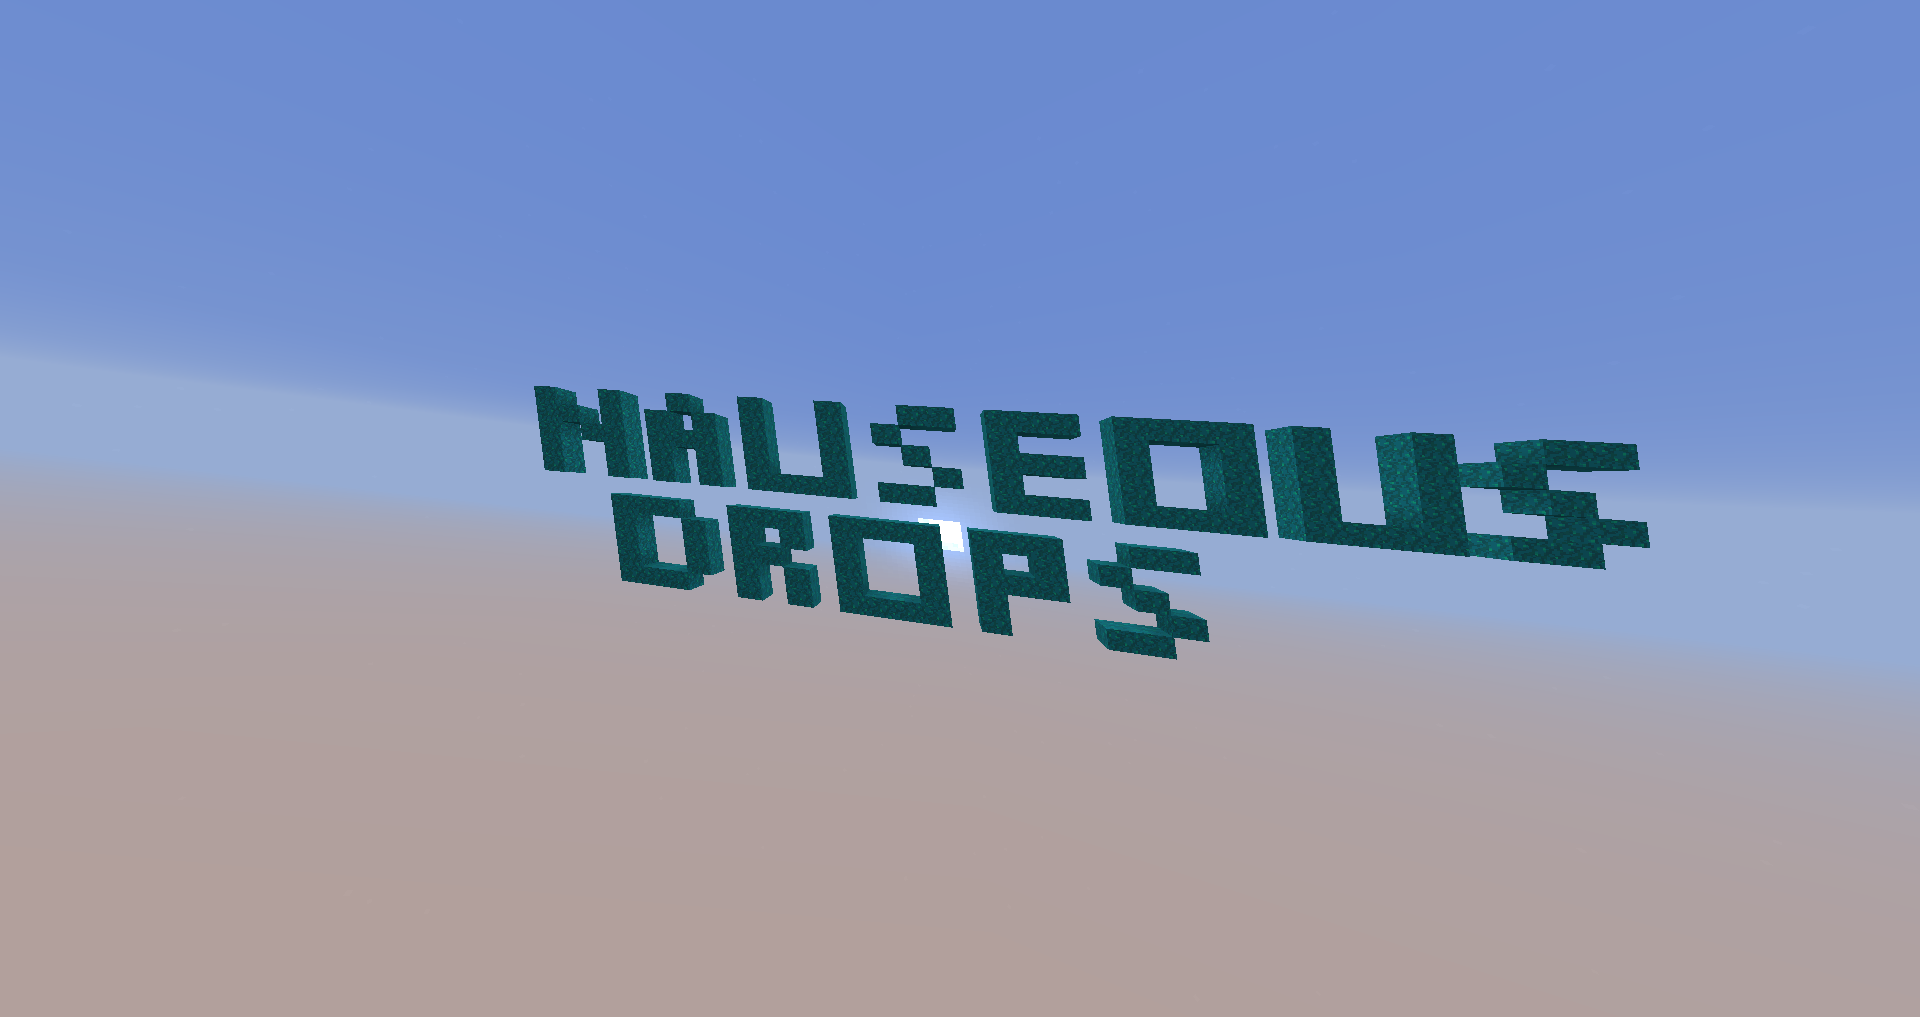 Download Nauseous Droppers for Minecraft 1.16.4